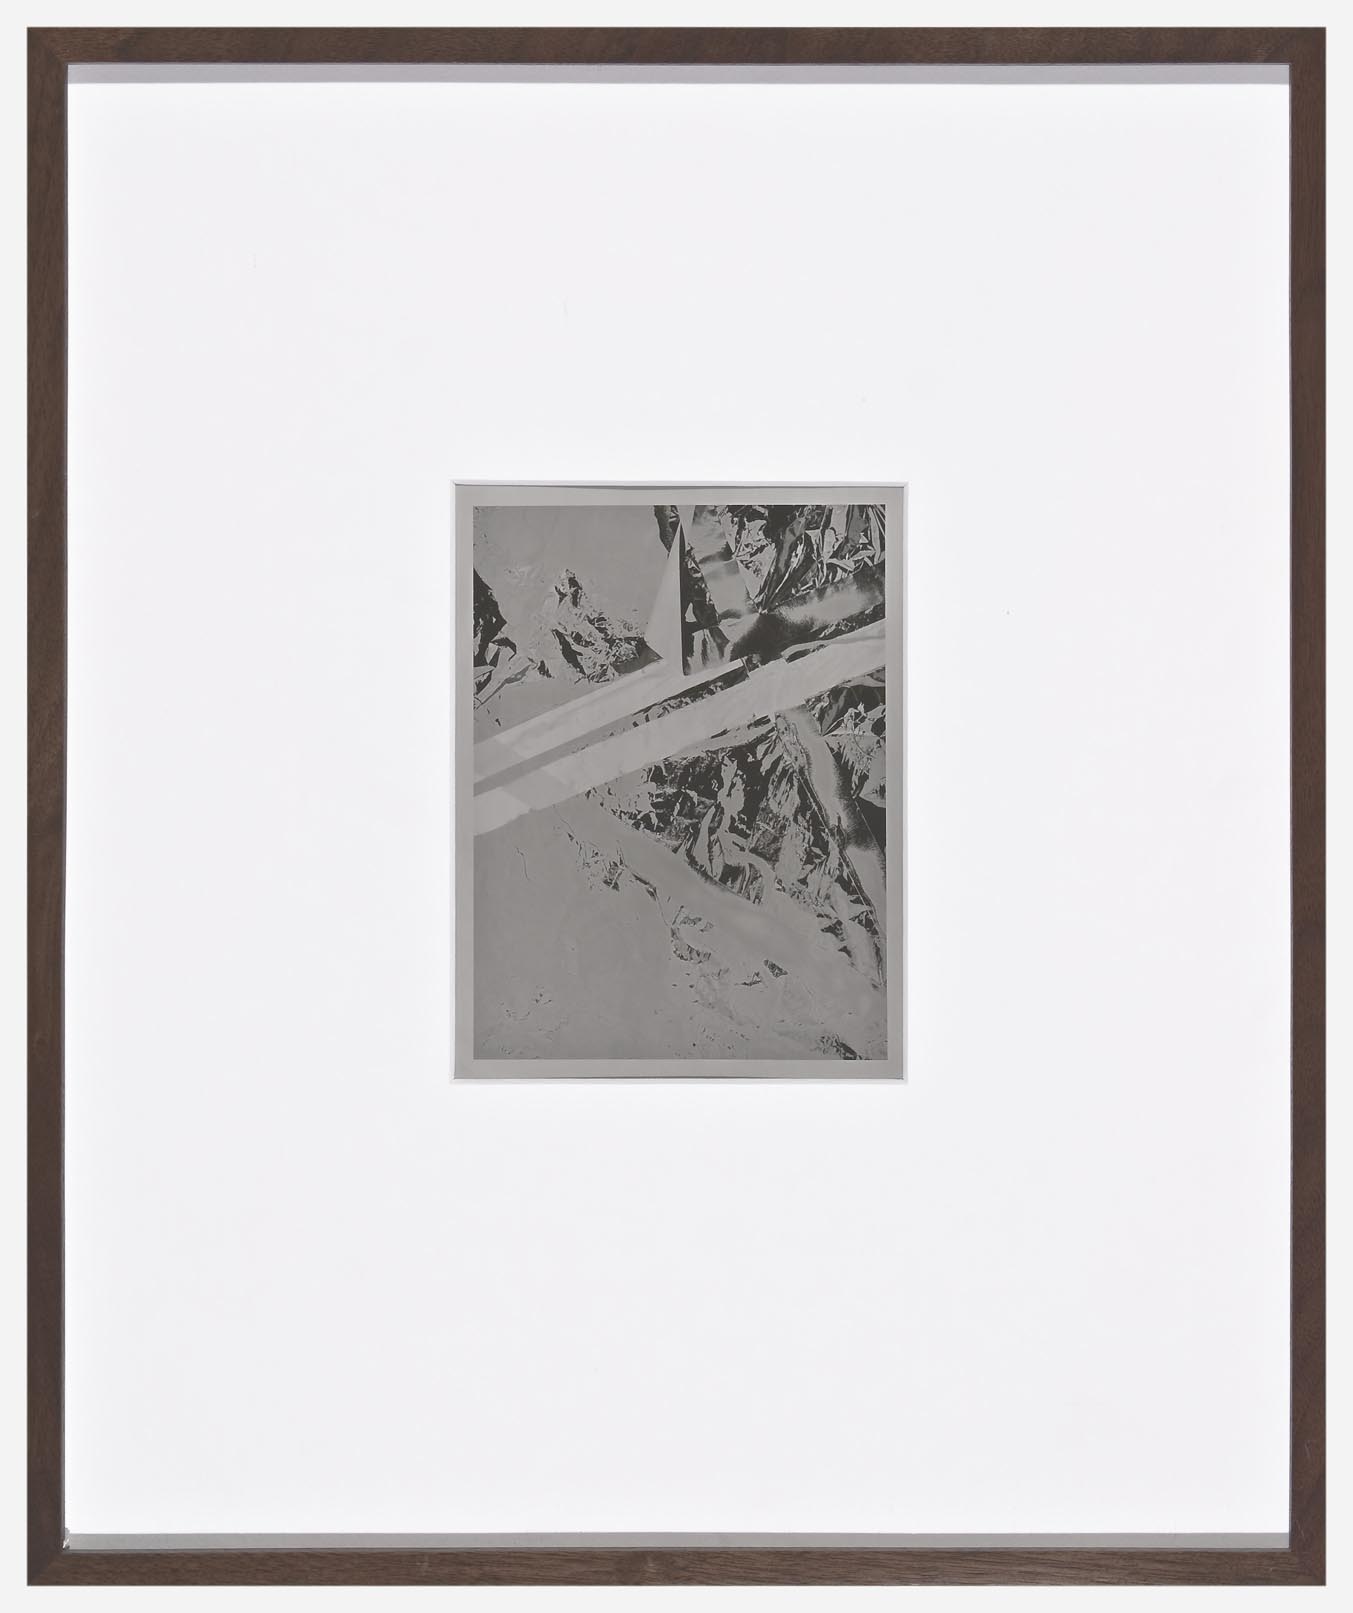     Anthony Pearson Untitled (Solarisation) 2007 unique framed silver gelatin photograph 43.2 x 35.6 cm 